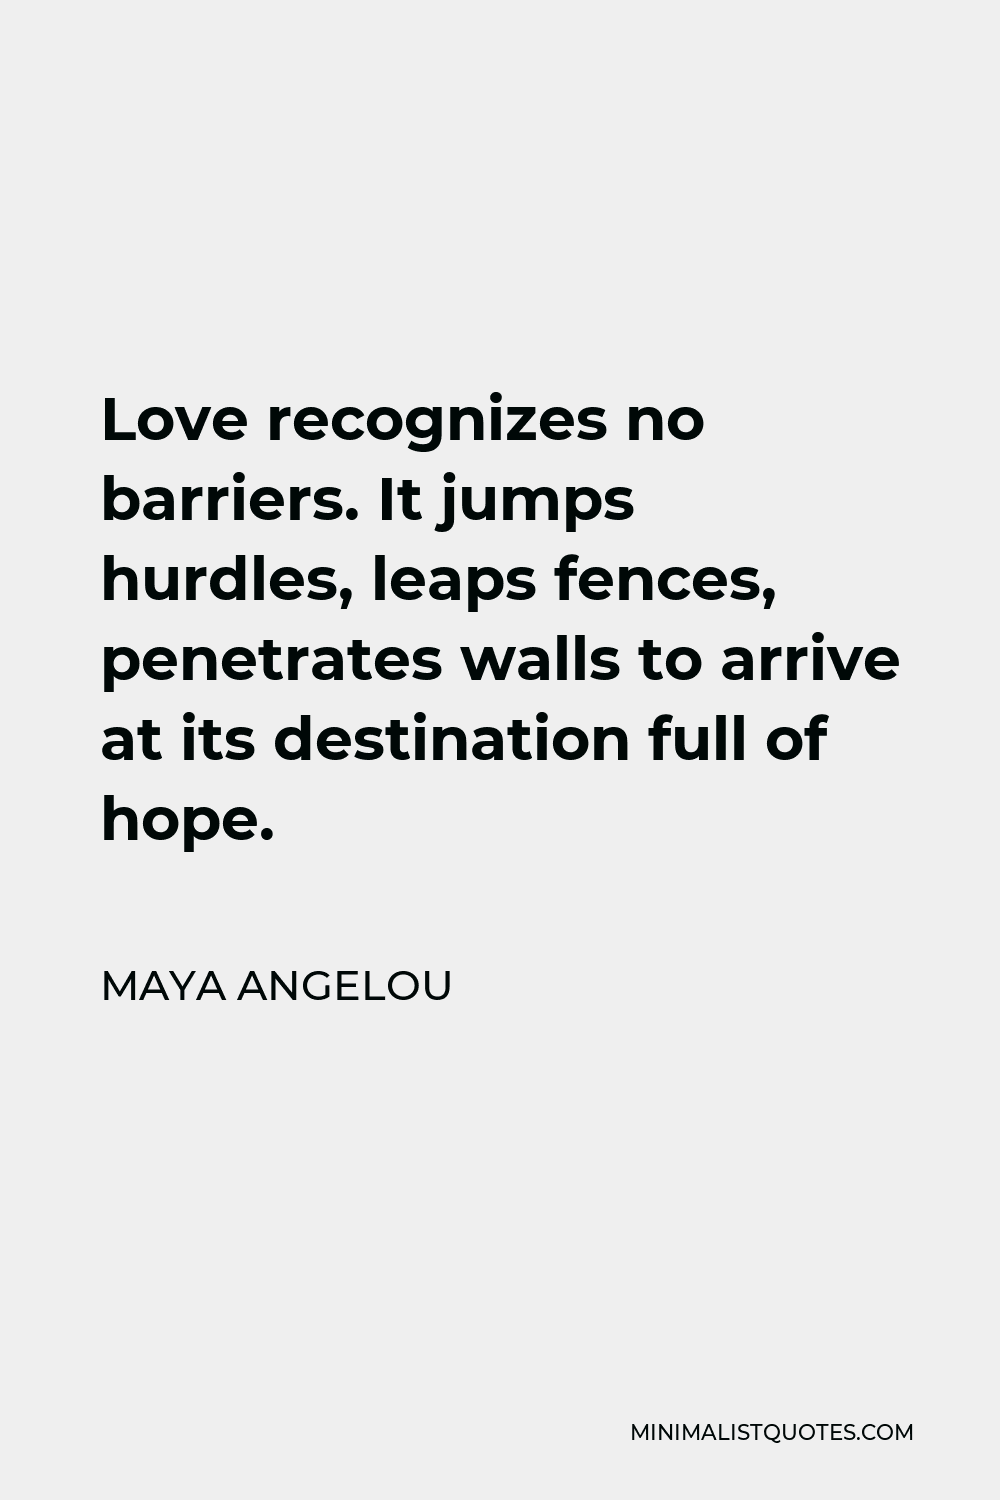 Maya Angelou Quote - Love recognizes no barriers. It jumps hurdles, leaps fences, penetrates walls to arrive at its destination full of hope.